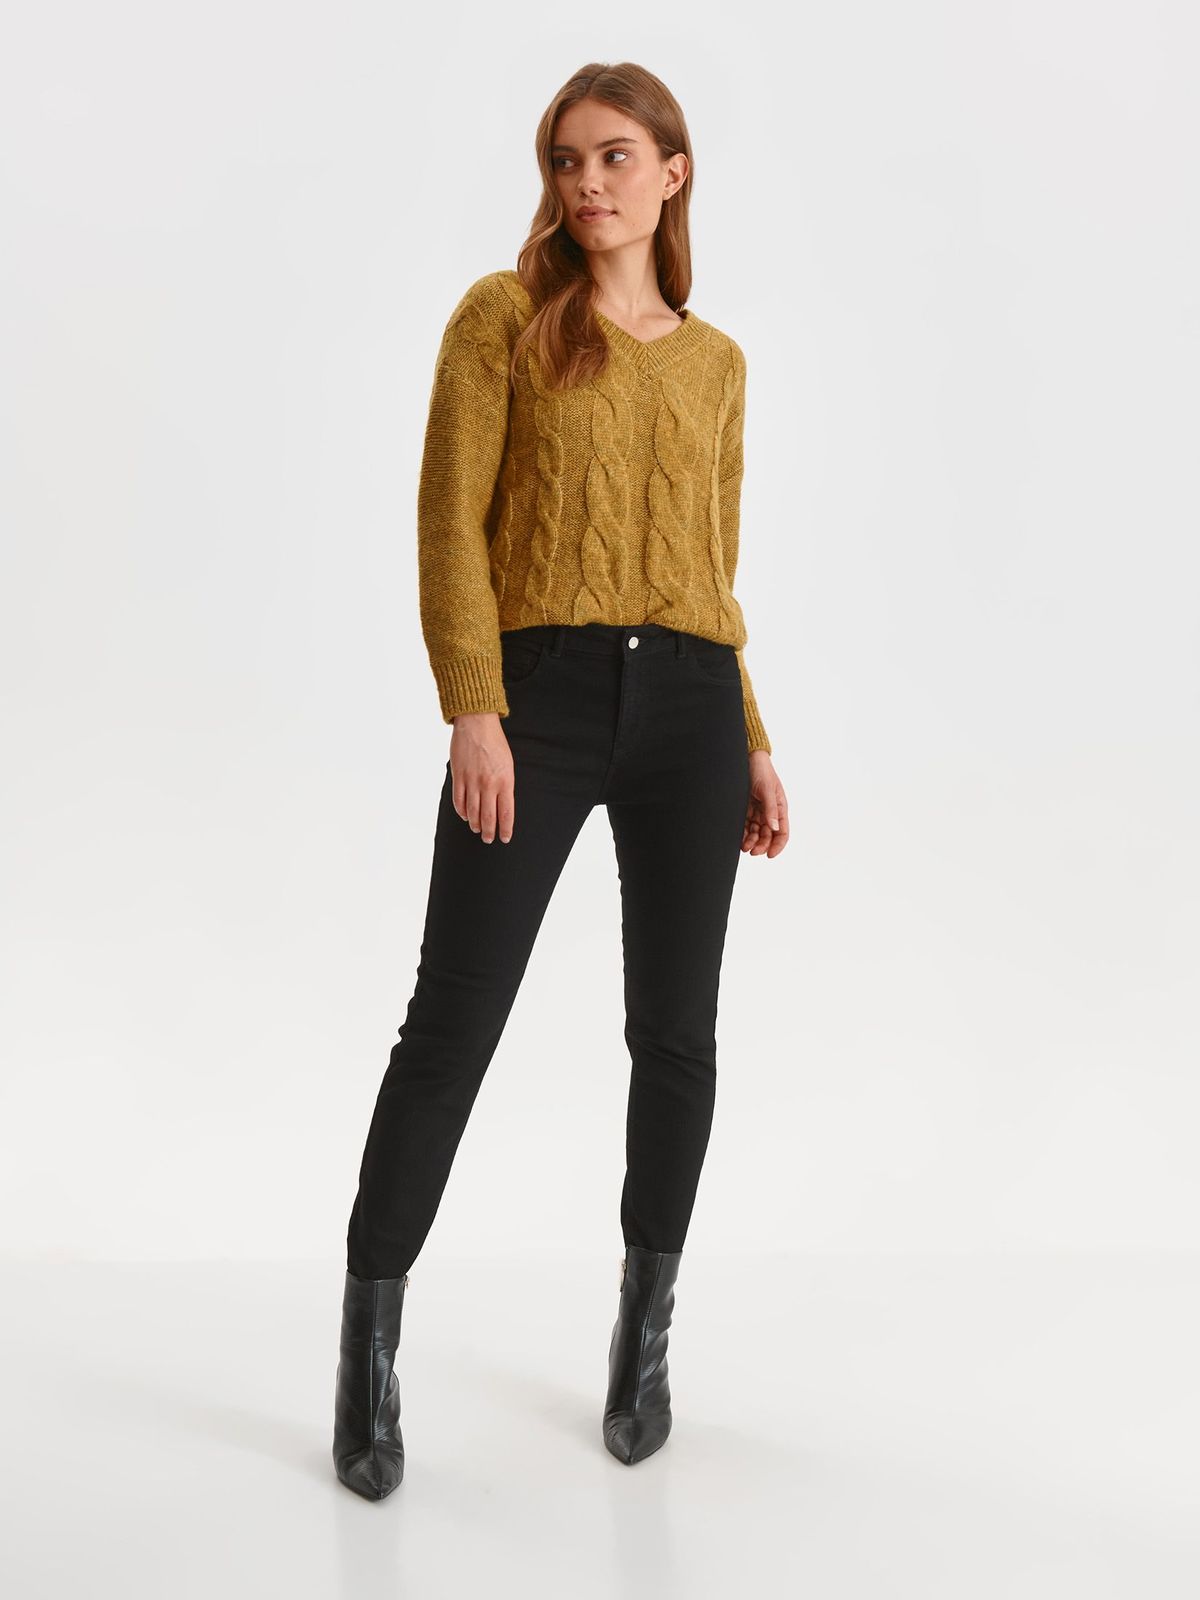 Yellow sweater knitted with v-neckline loose fit